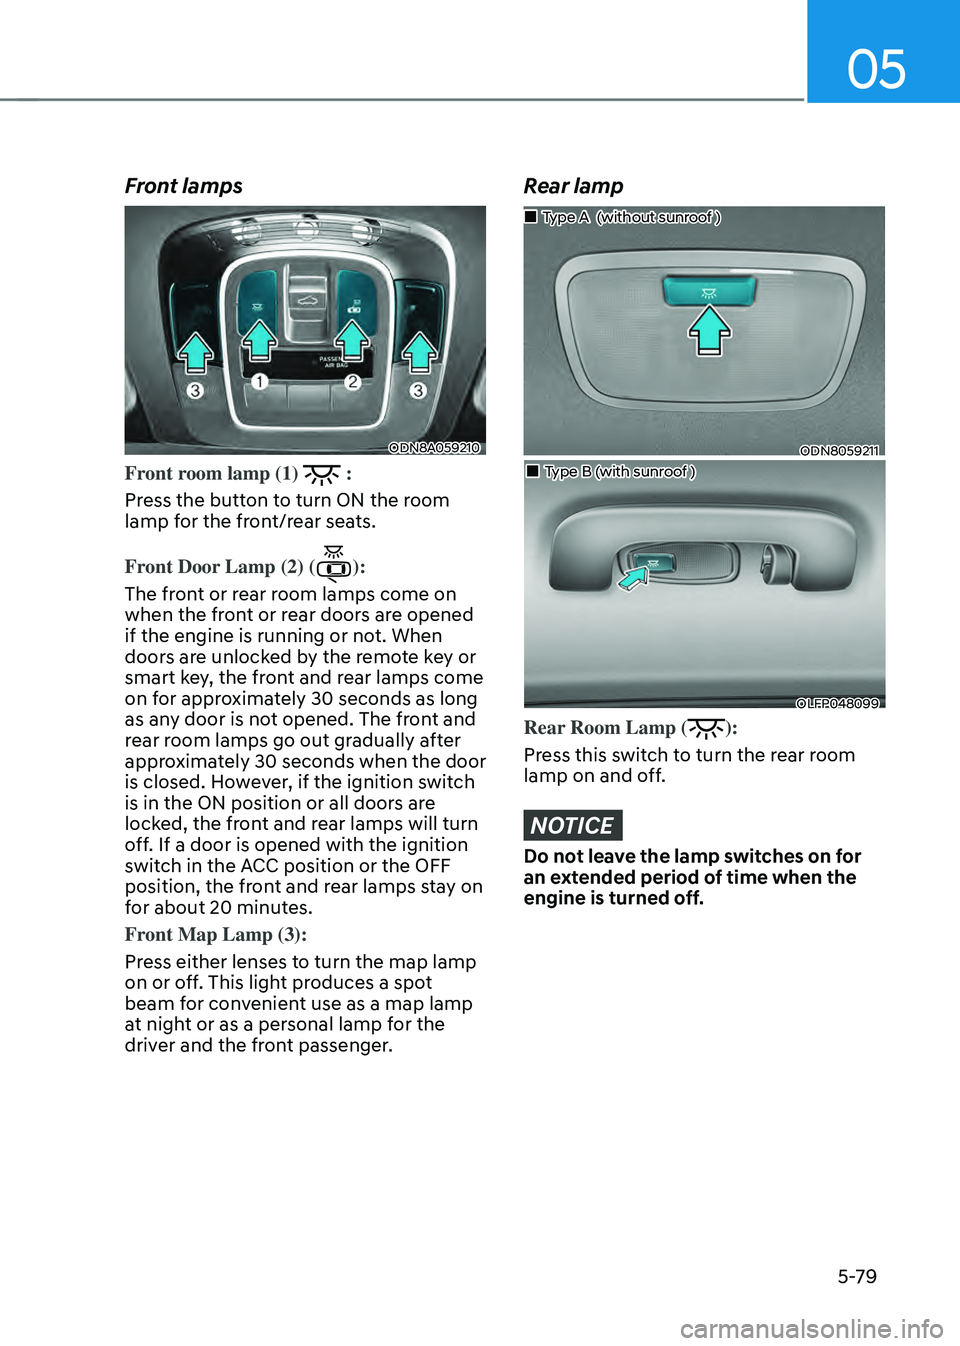 HYUNDAI SONATA HYBRID 2022 User Guide 05
5-79
Front lamps
ODN8A059210
Front room lamp (1)  :
Press the button to turn ON the room 
lamp for the front/rear seats.
Front Door Lamp (2) (
):
The front or rear room lamps come on 
when the fron